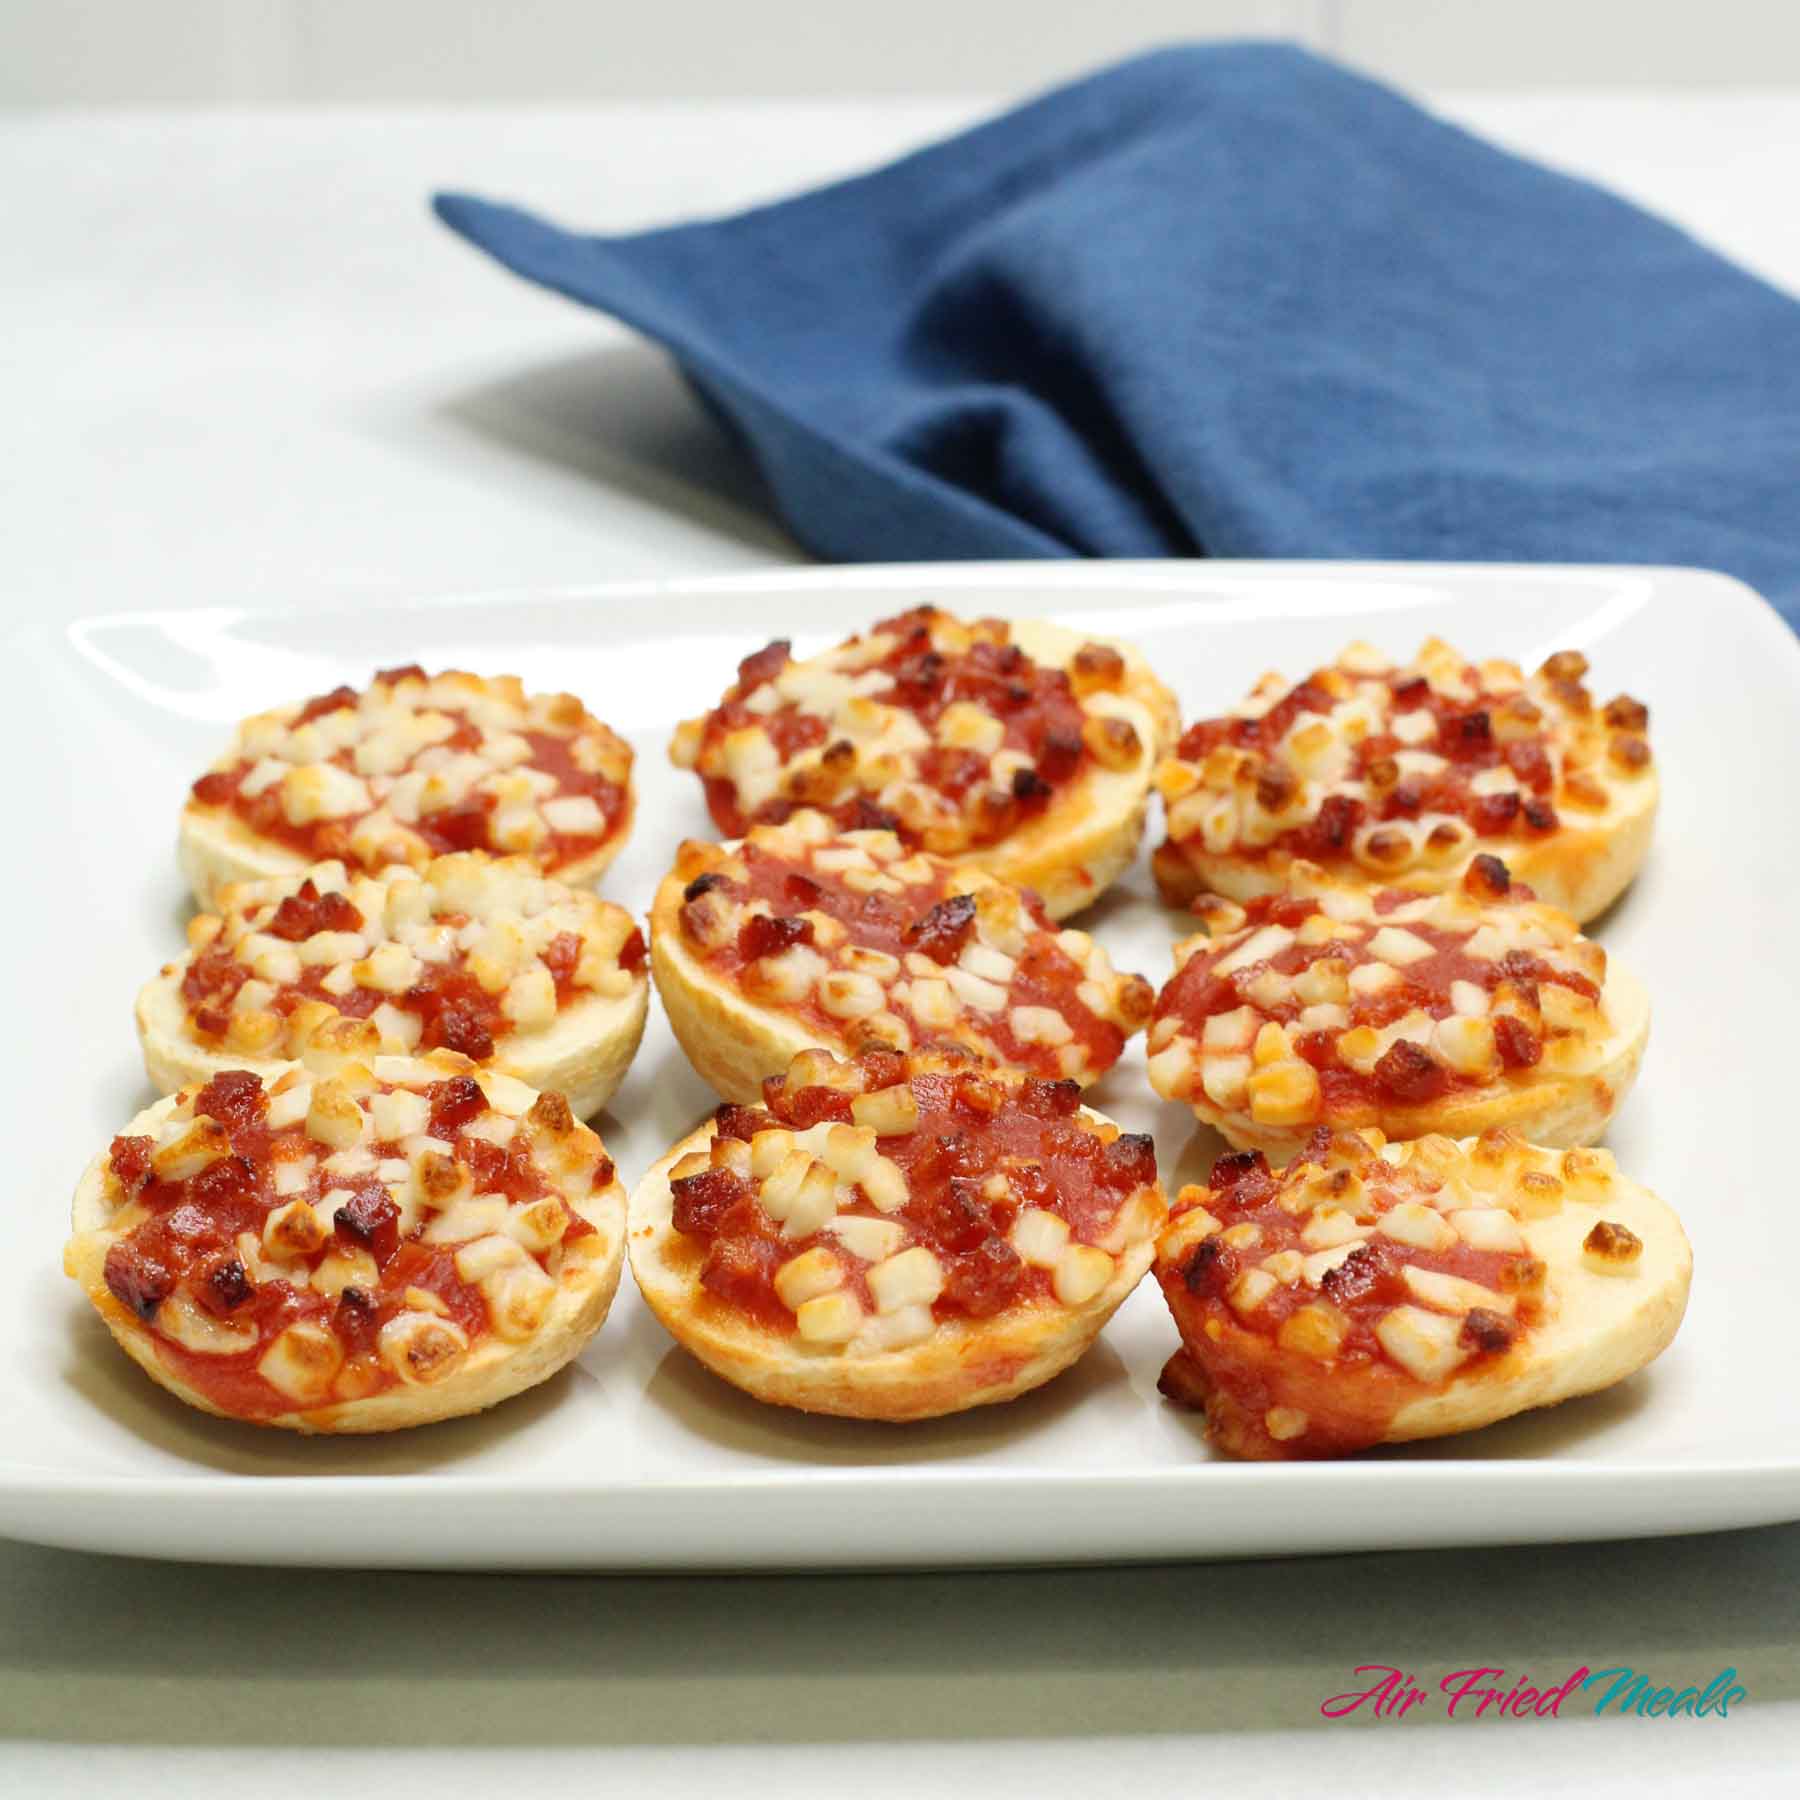 Air fried bagel bites on a plate.